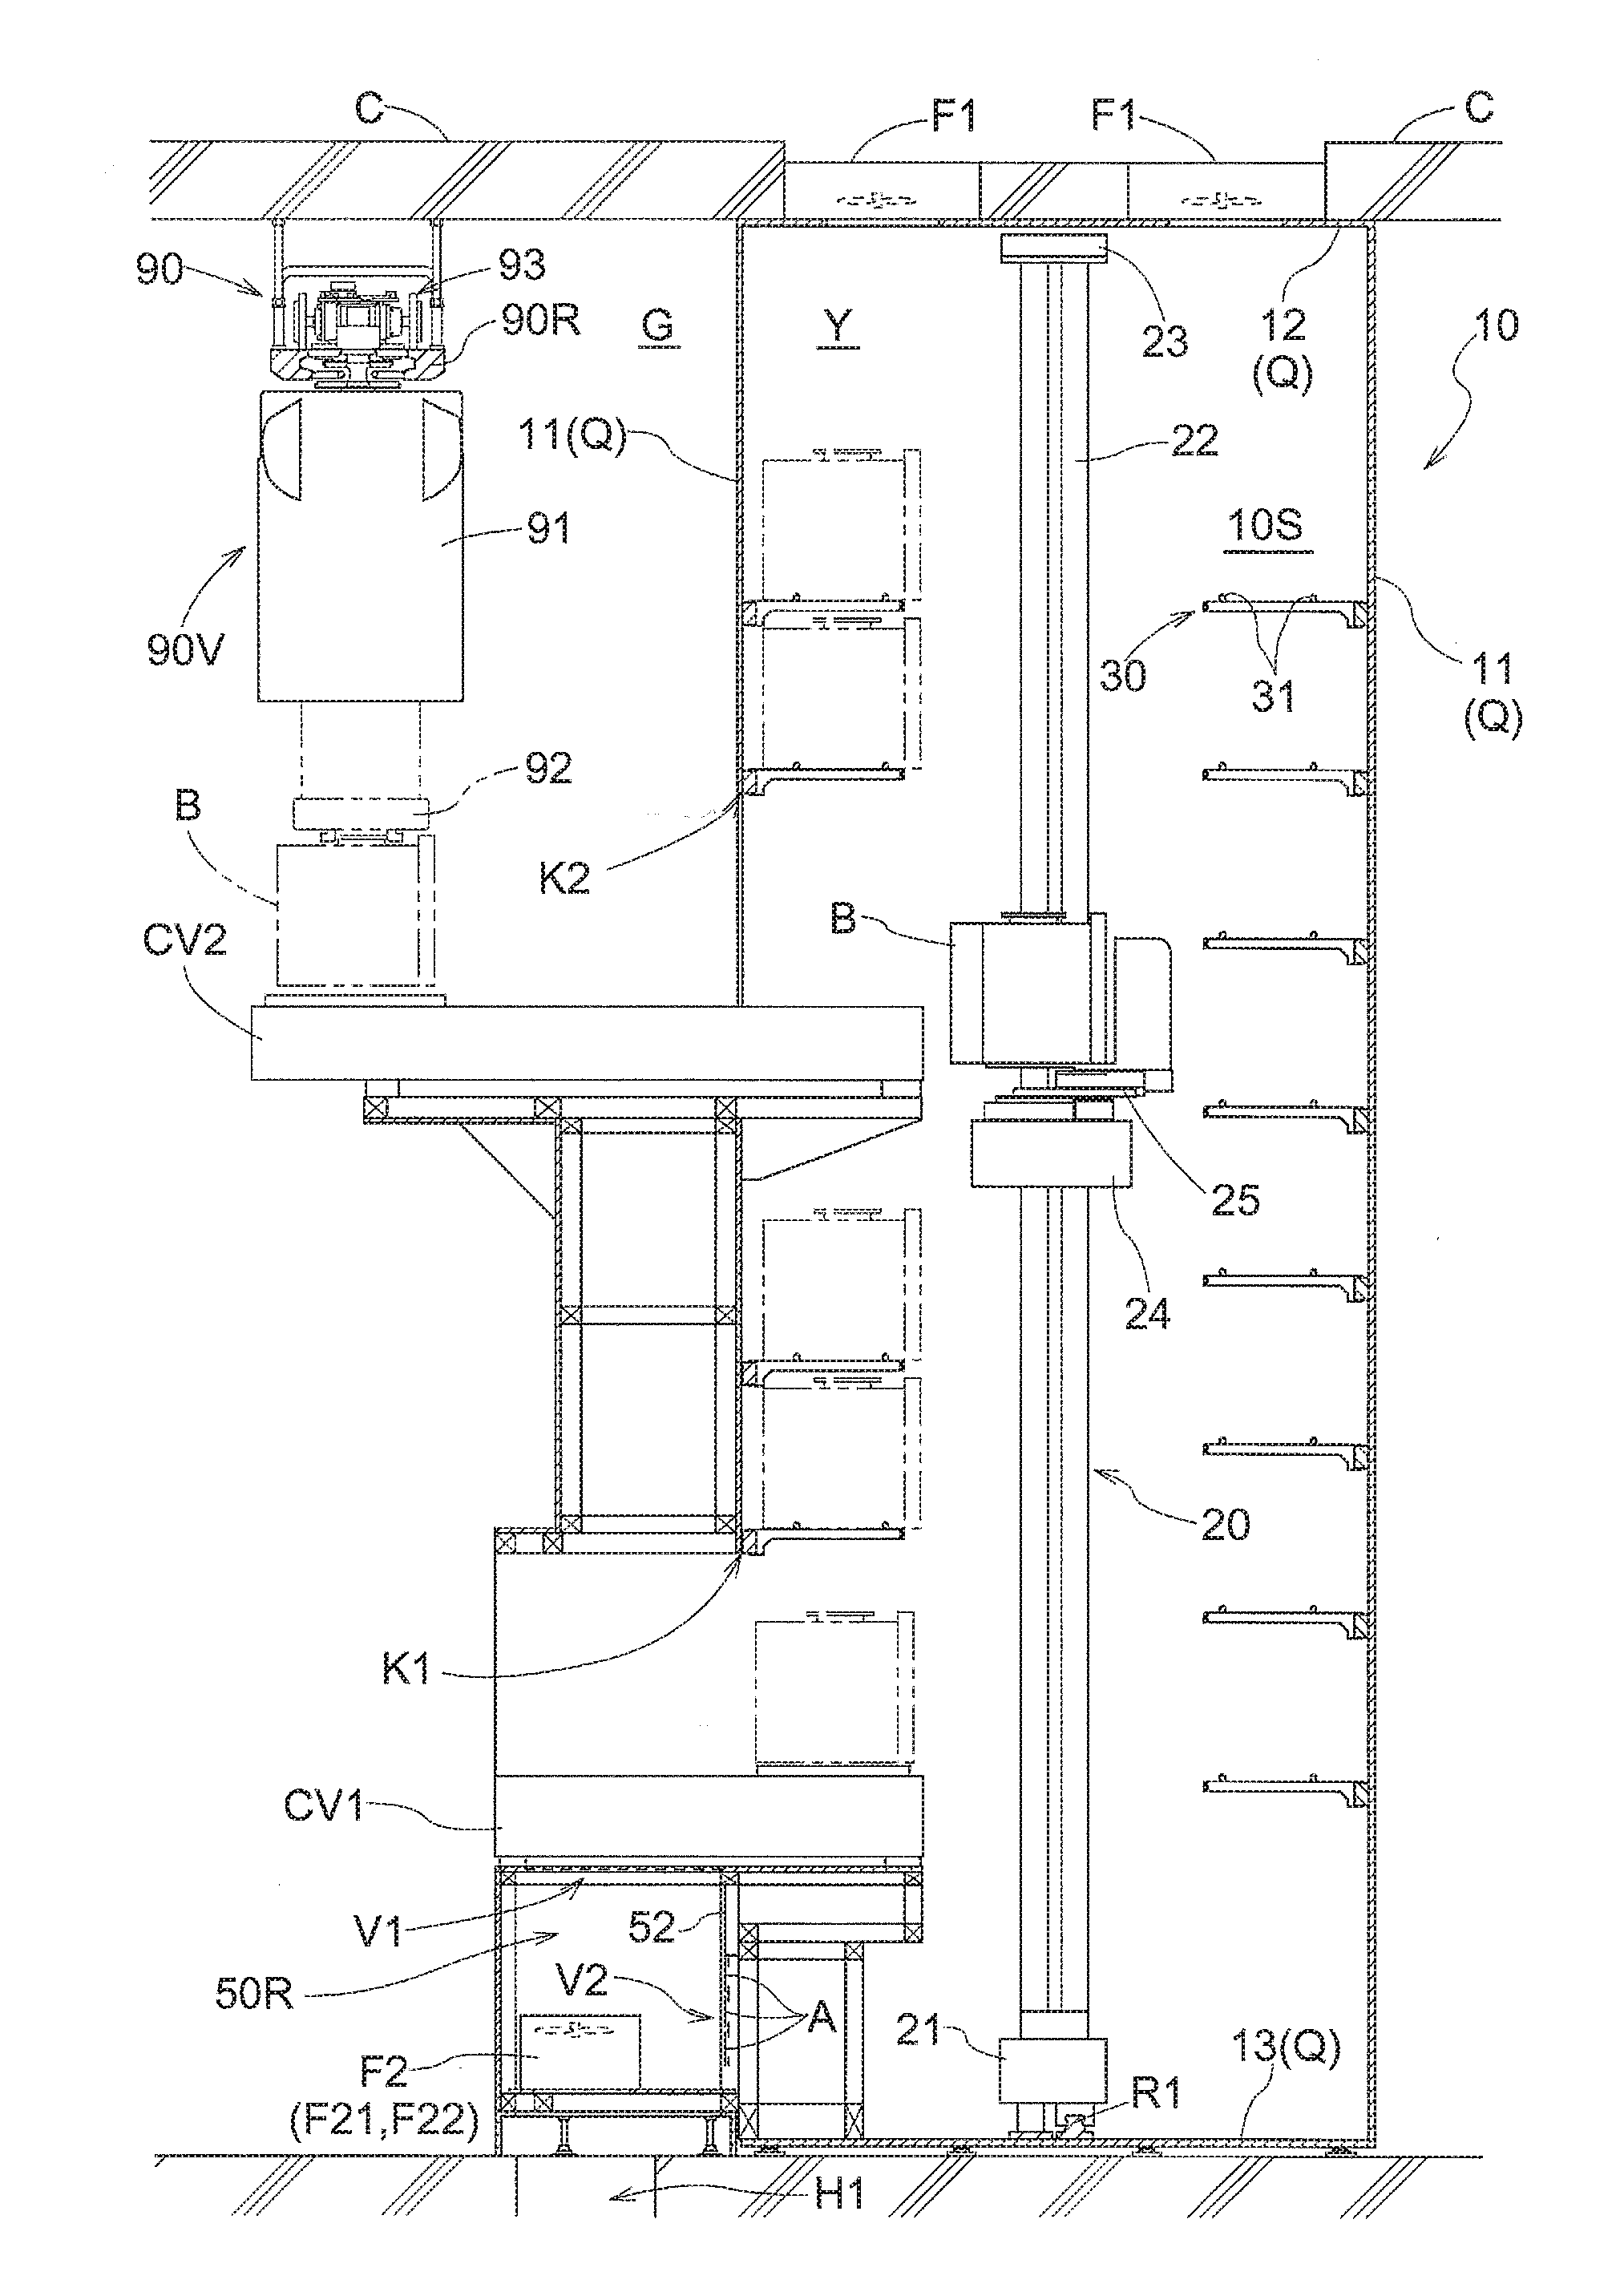 Storage Facility for Semiconductor Containers